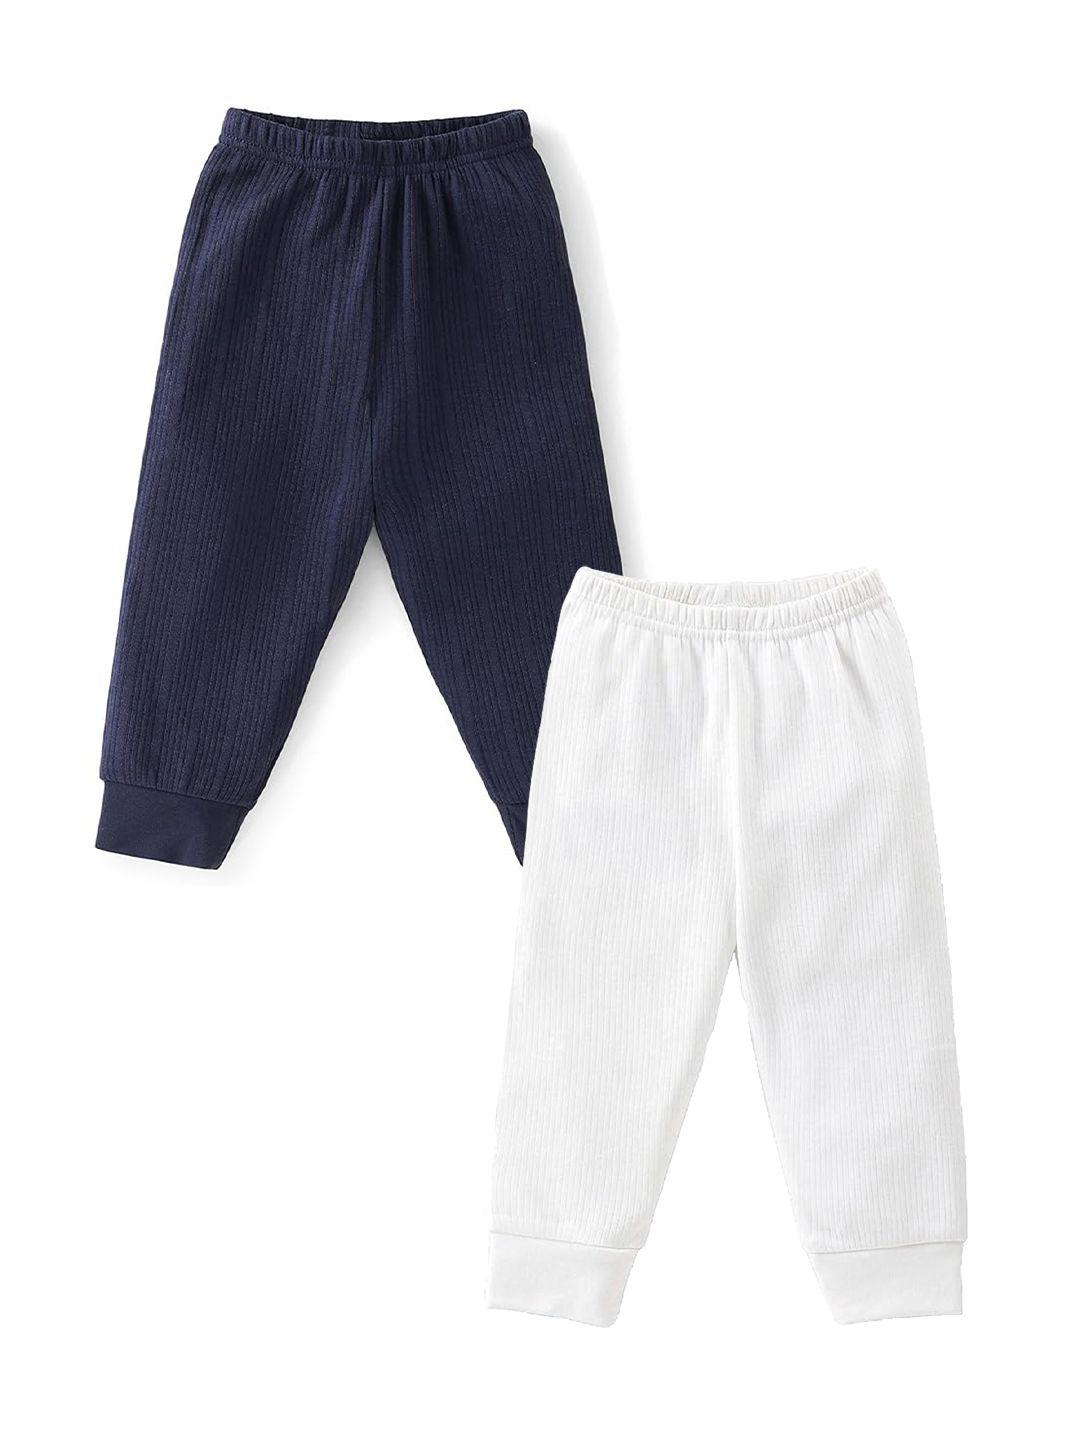 baesd infants pack of 2 cotton thermal bottoms